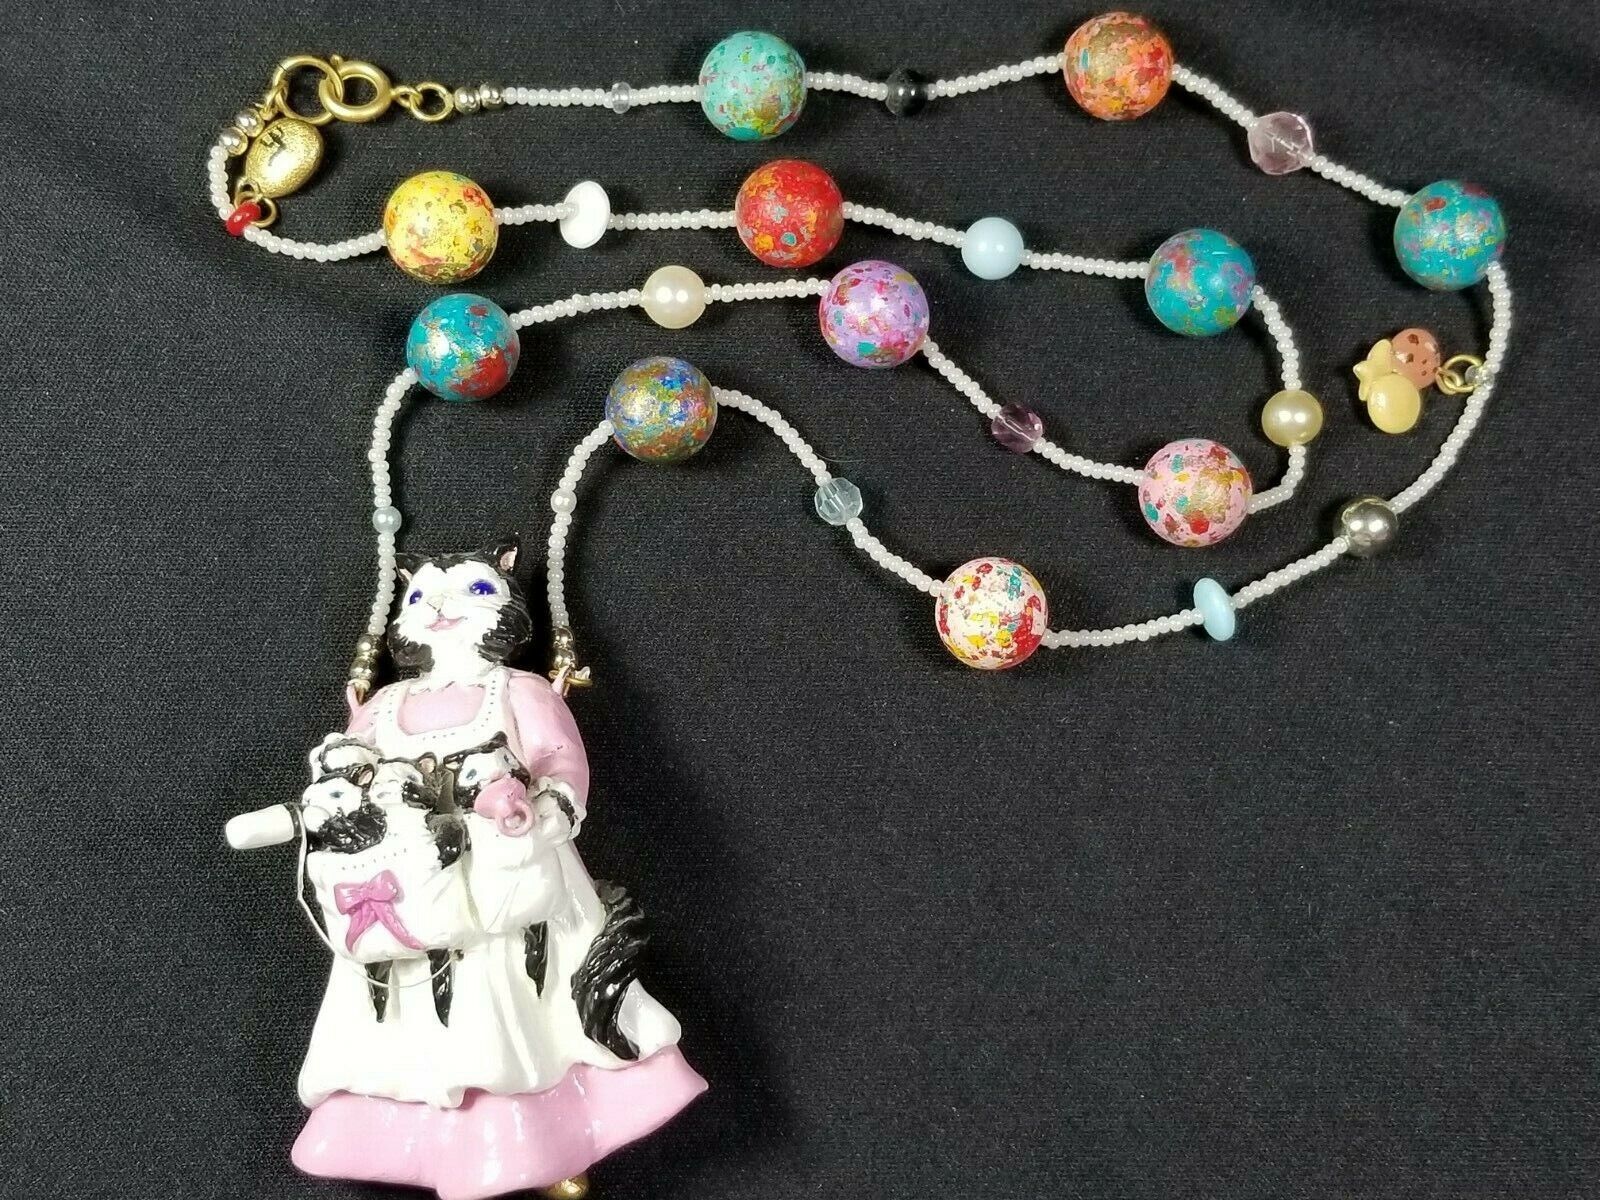 VTG Signed/Dated \'92 Handcrafted Necklace/Mom Cat/Kittens/Removable Bottle Binky